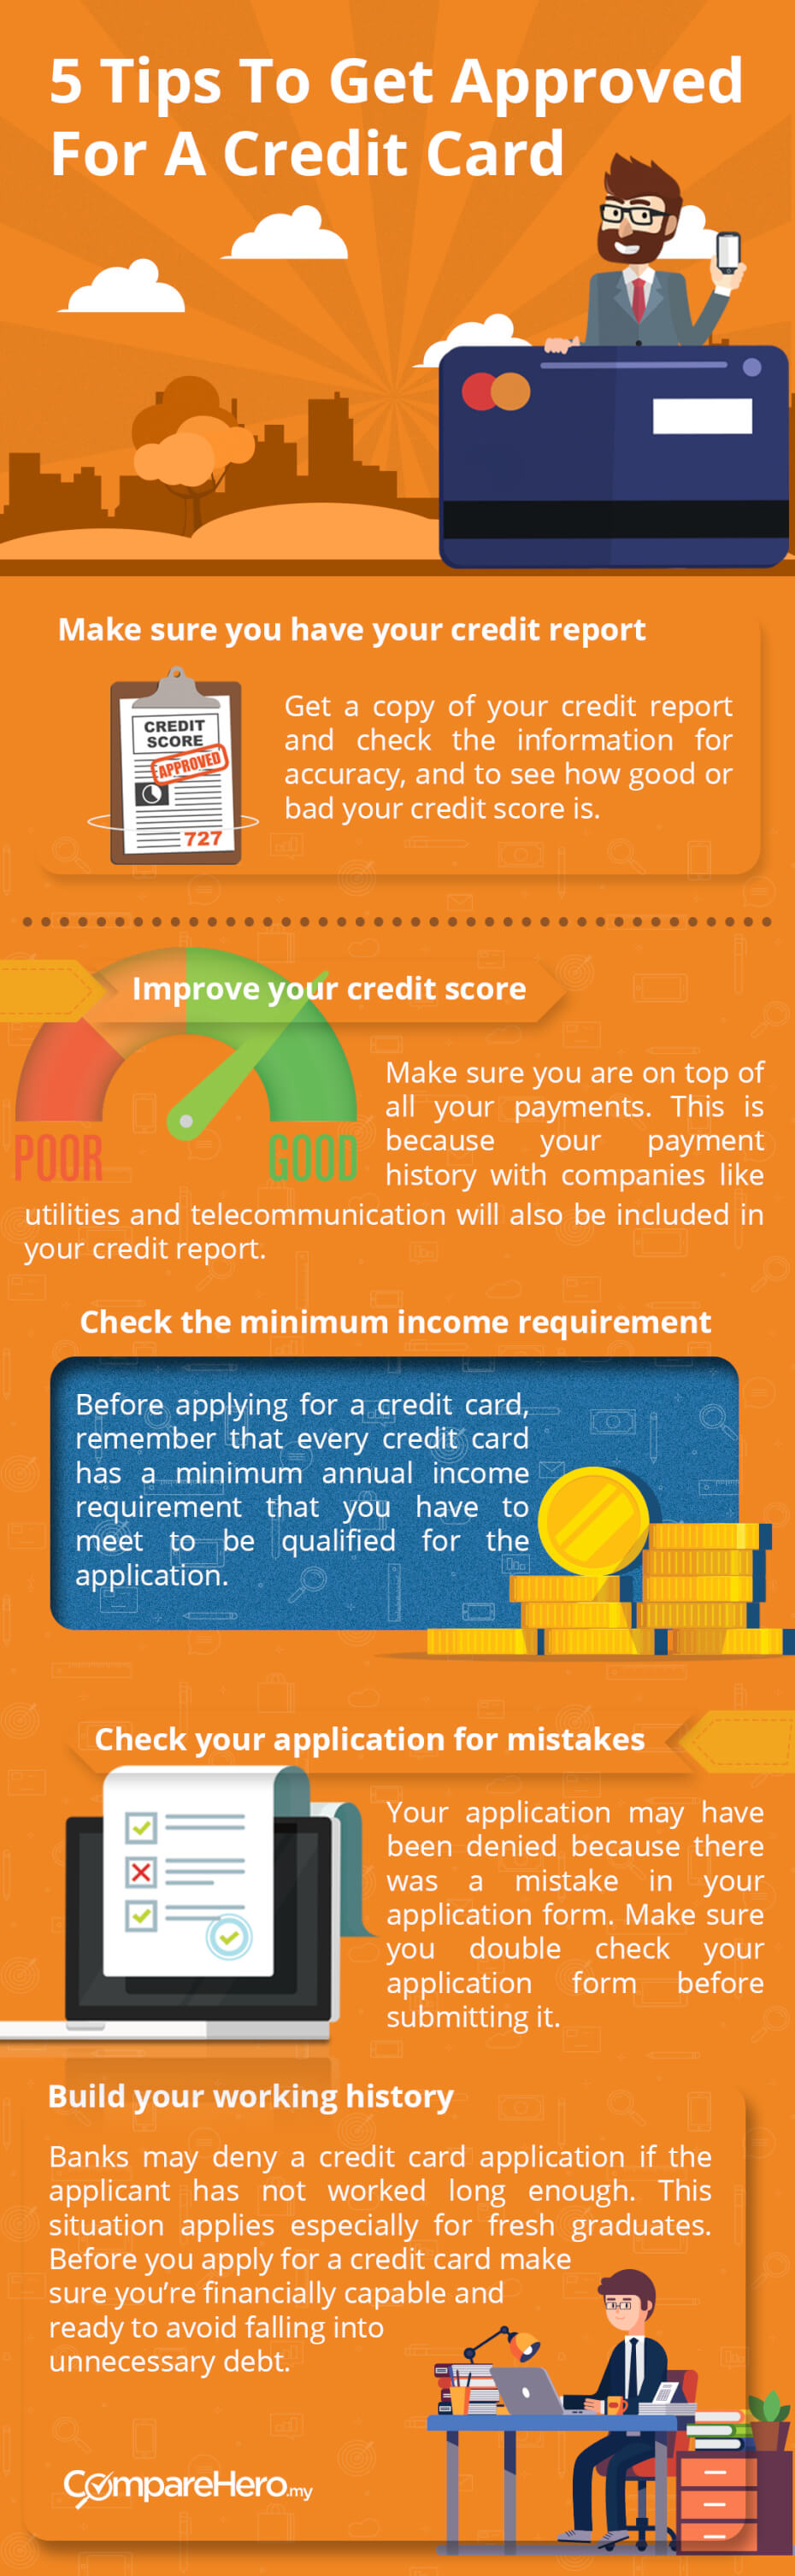 5_tips_to_get_approved_for_a_credit_card_